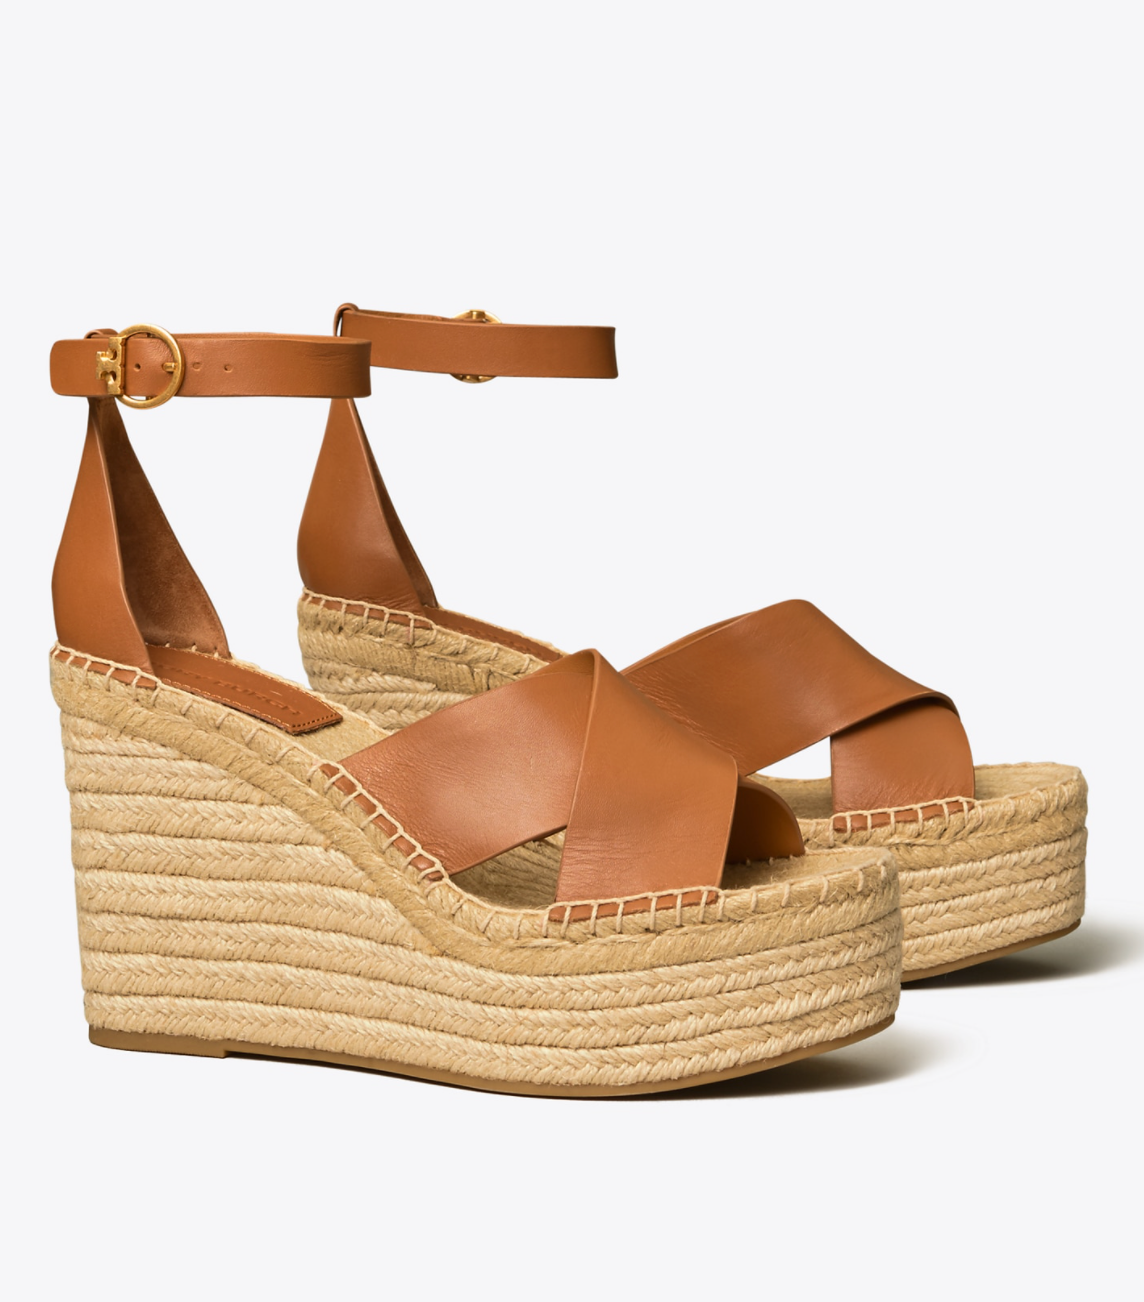 Tory Burch Selby Wedge Espadrille Sandal